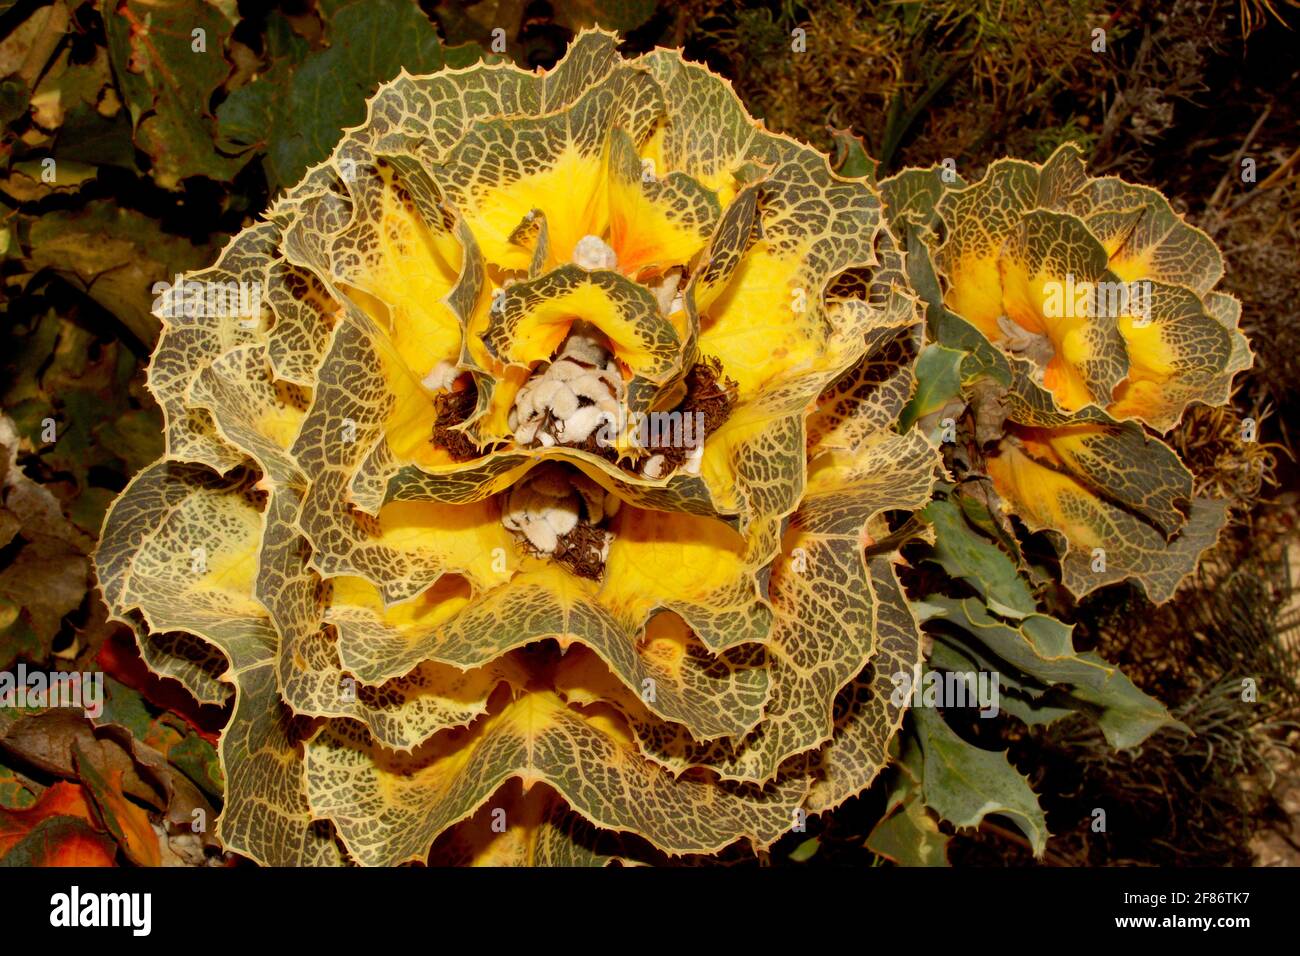 View from above on Hakea victoria leaves with flower buds, Western Australia Stock Photo